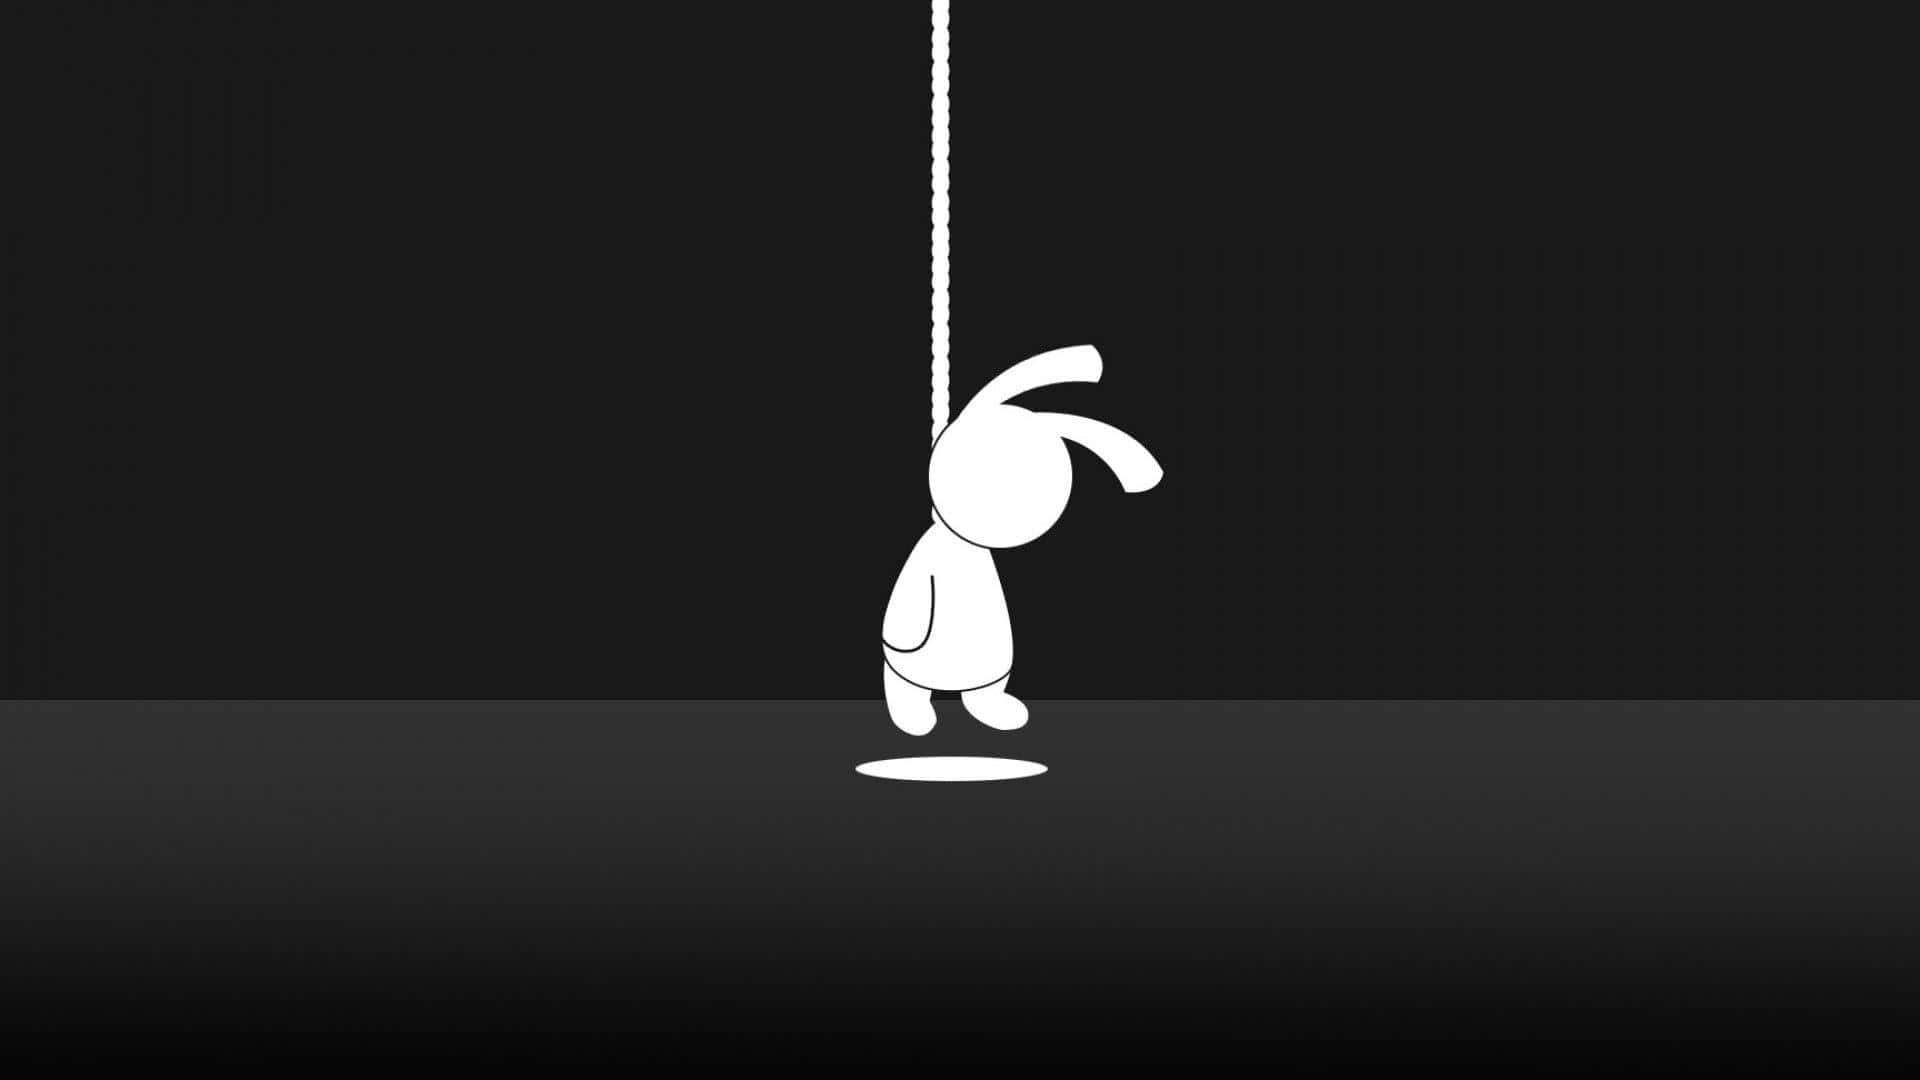 A Black And White Image Of A Rabbit Hanging From A Rope Background